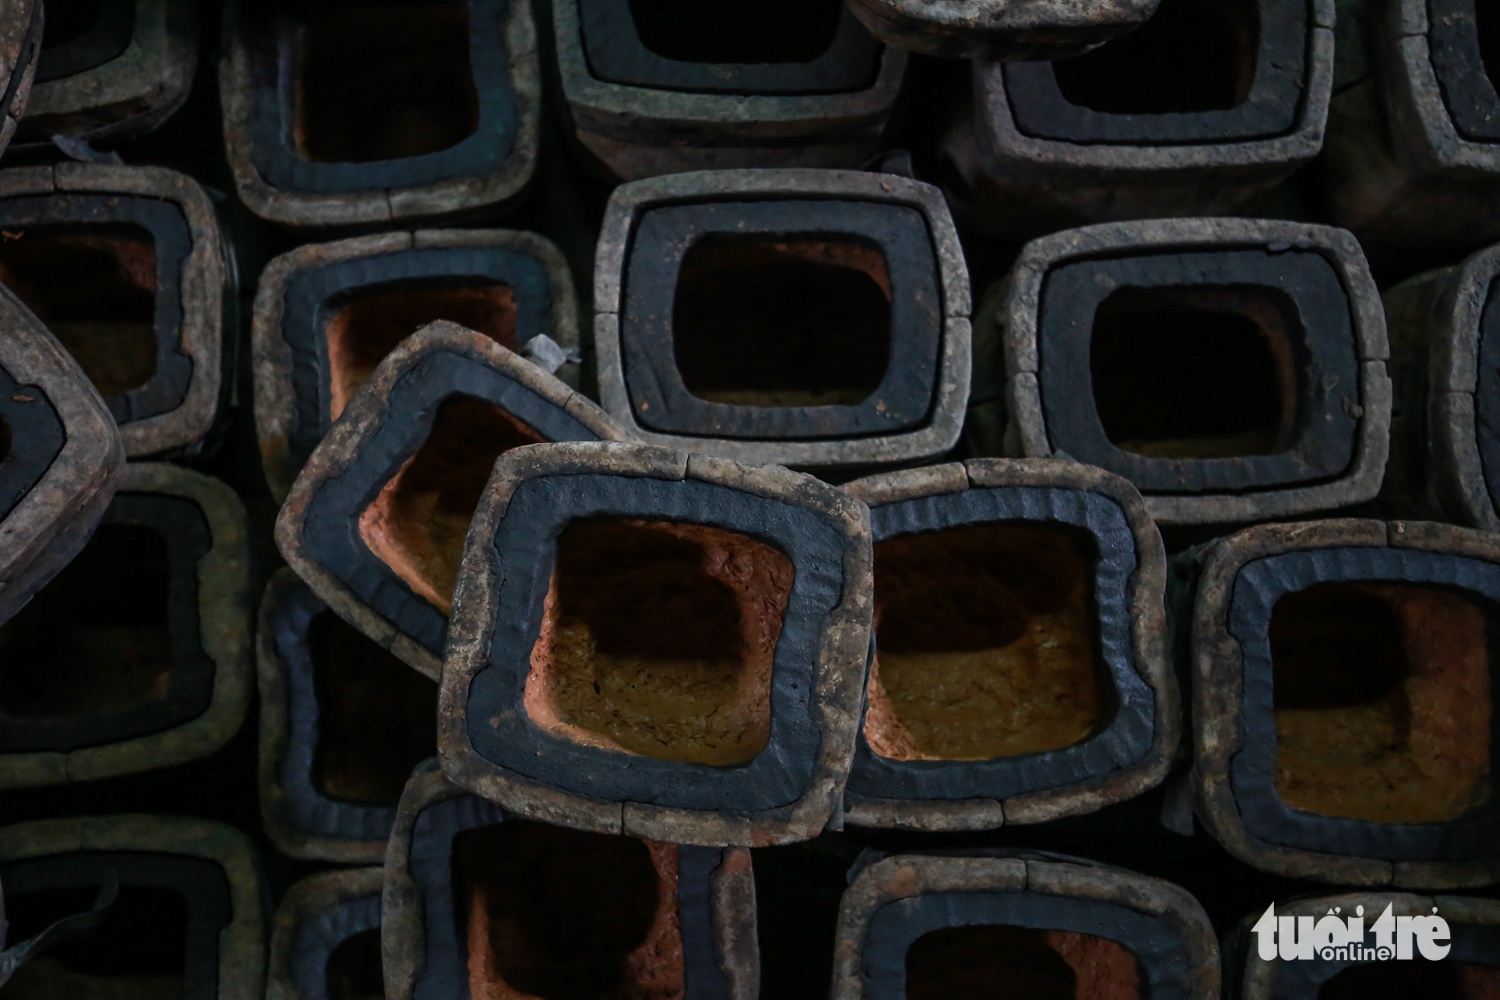 An internal mold is also needed to form the shape of a brass burner. Photo: Tuoi Tre